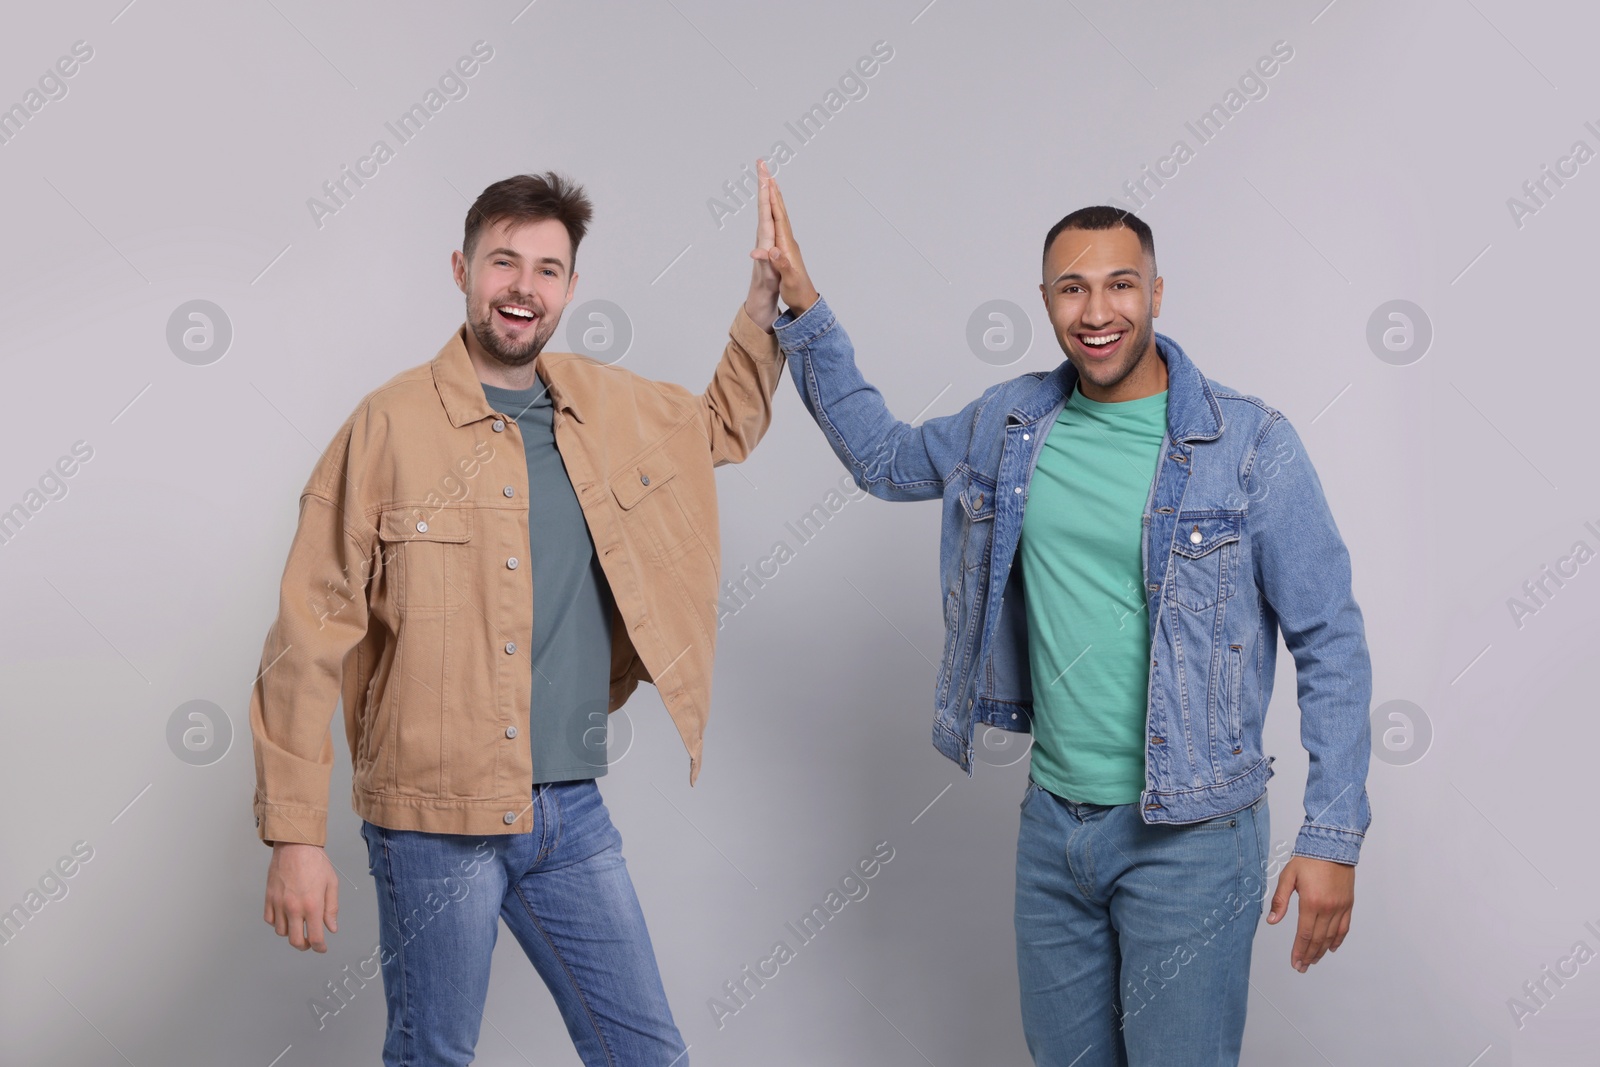 Photo of Men giving high five on grey background